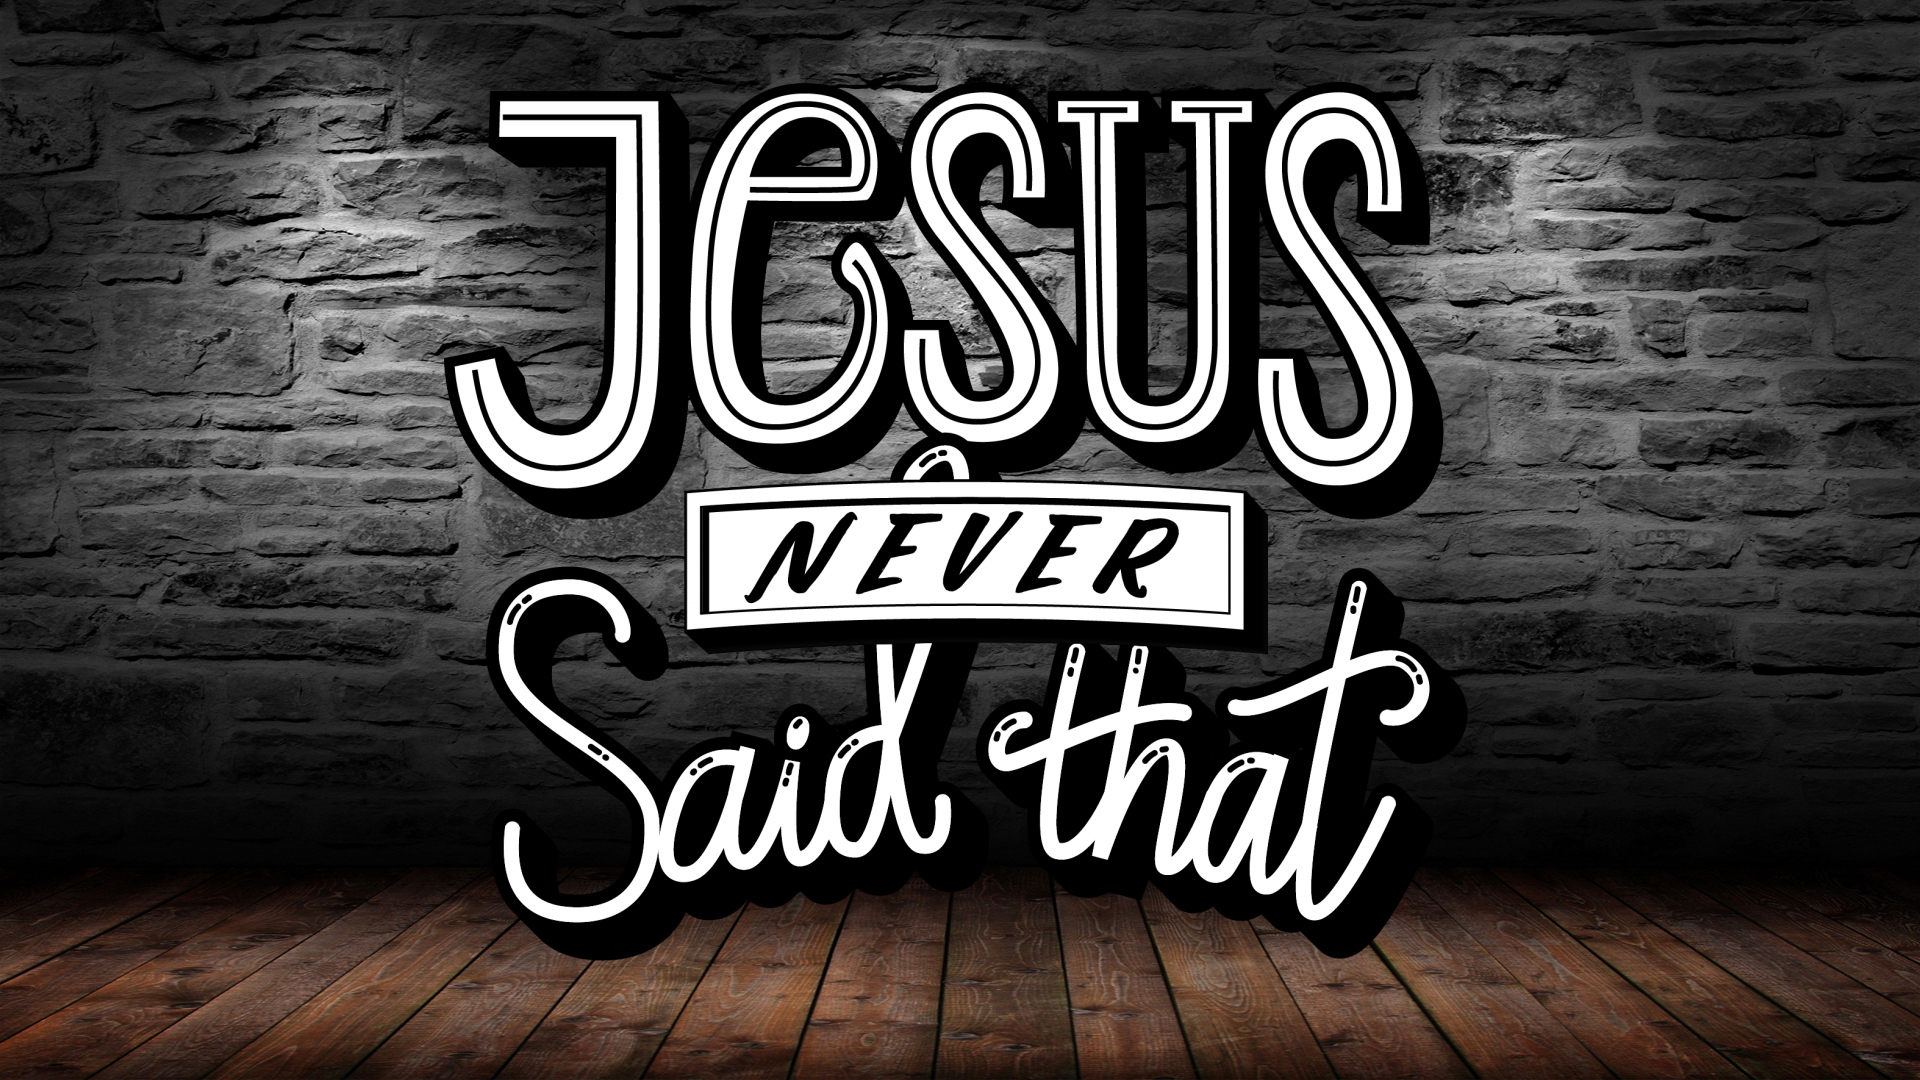 Jesus never said that: “Everyone should believe and act exactly like you”